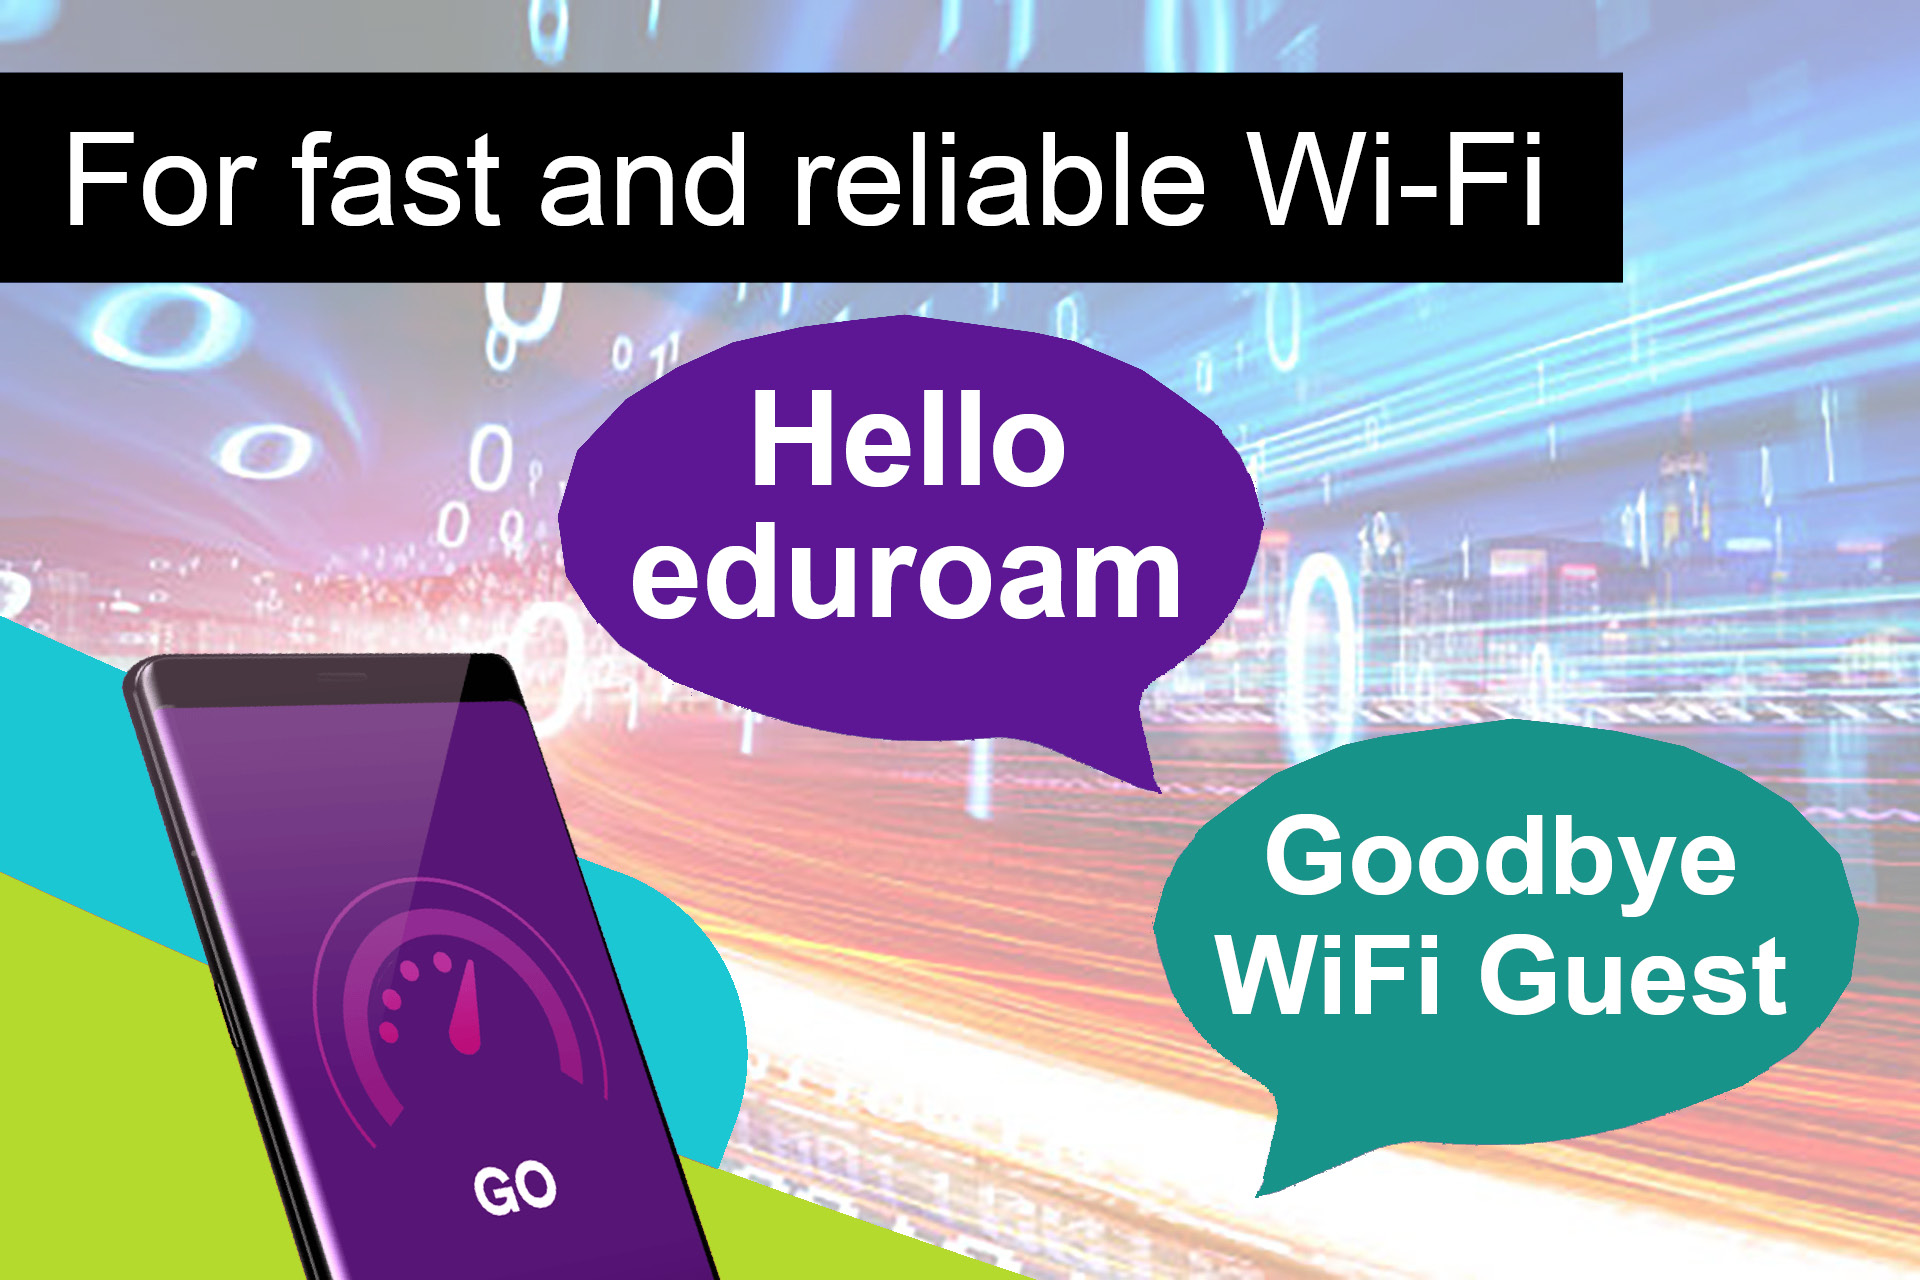 For fast and reliable WiFi just say Hello eduroam - Goodbye WiFi Guest